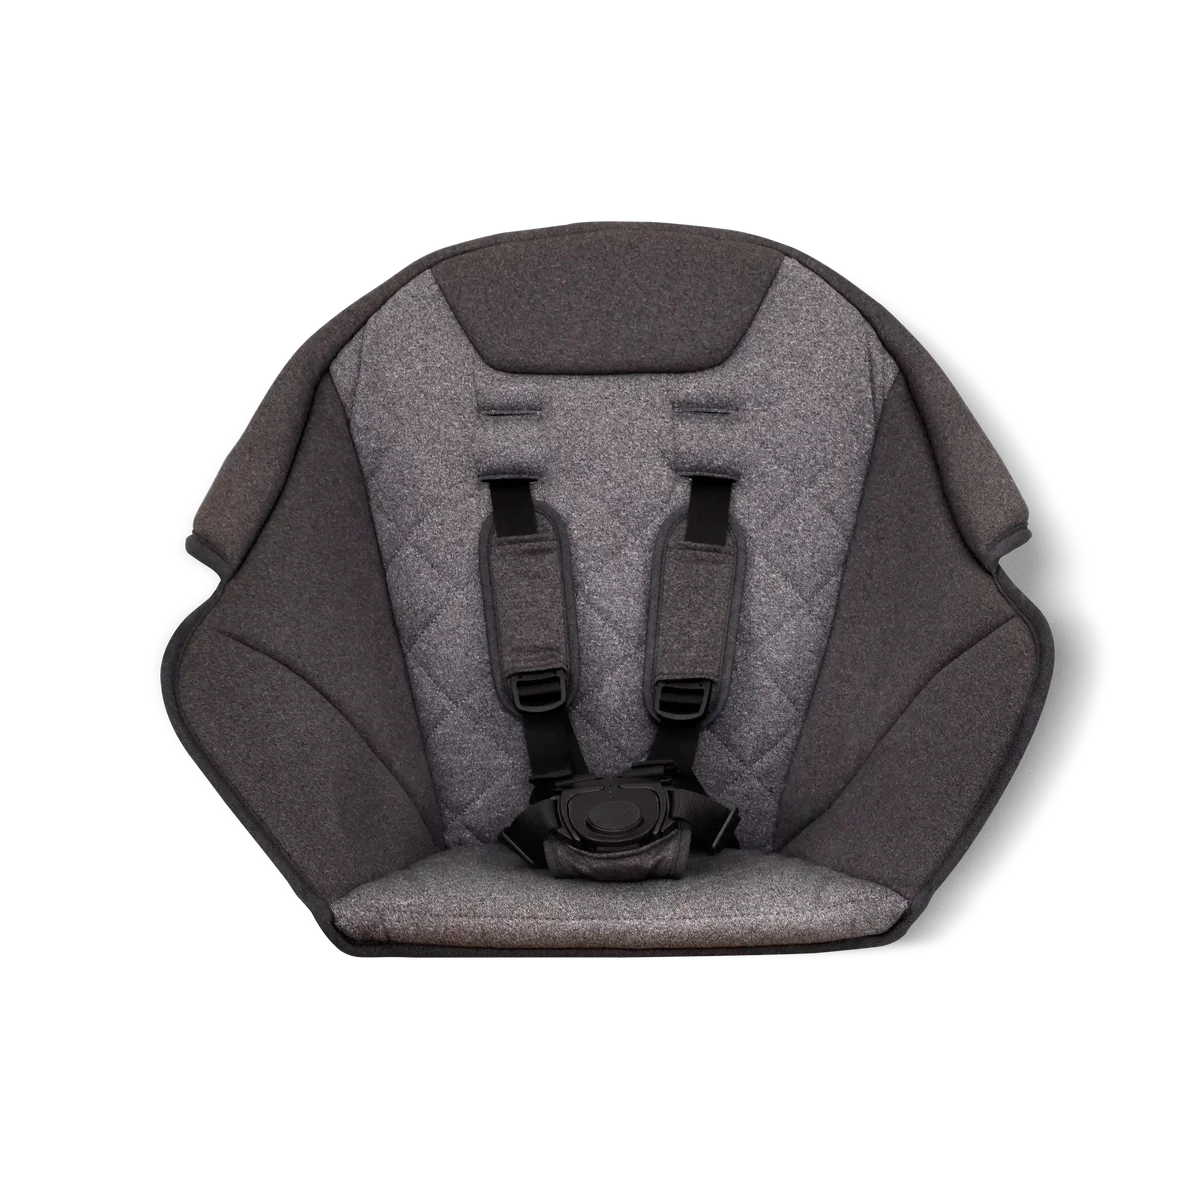 Veer Comfort Seat for Toddlers for Cruiser